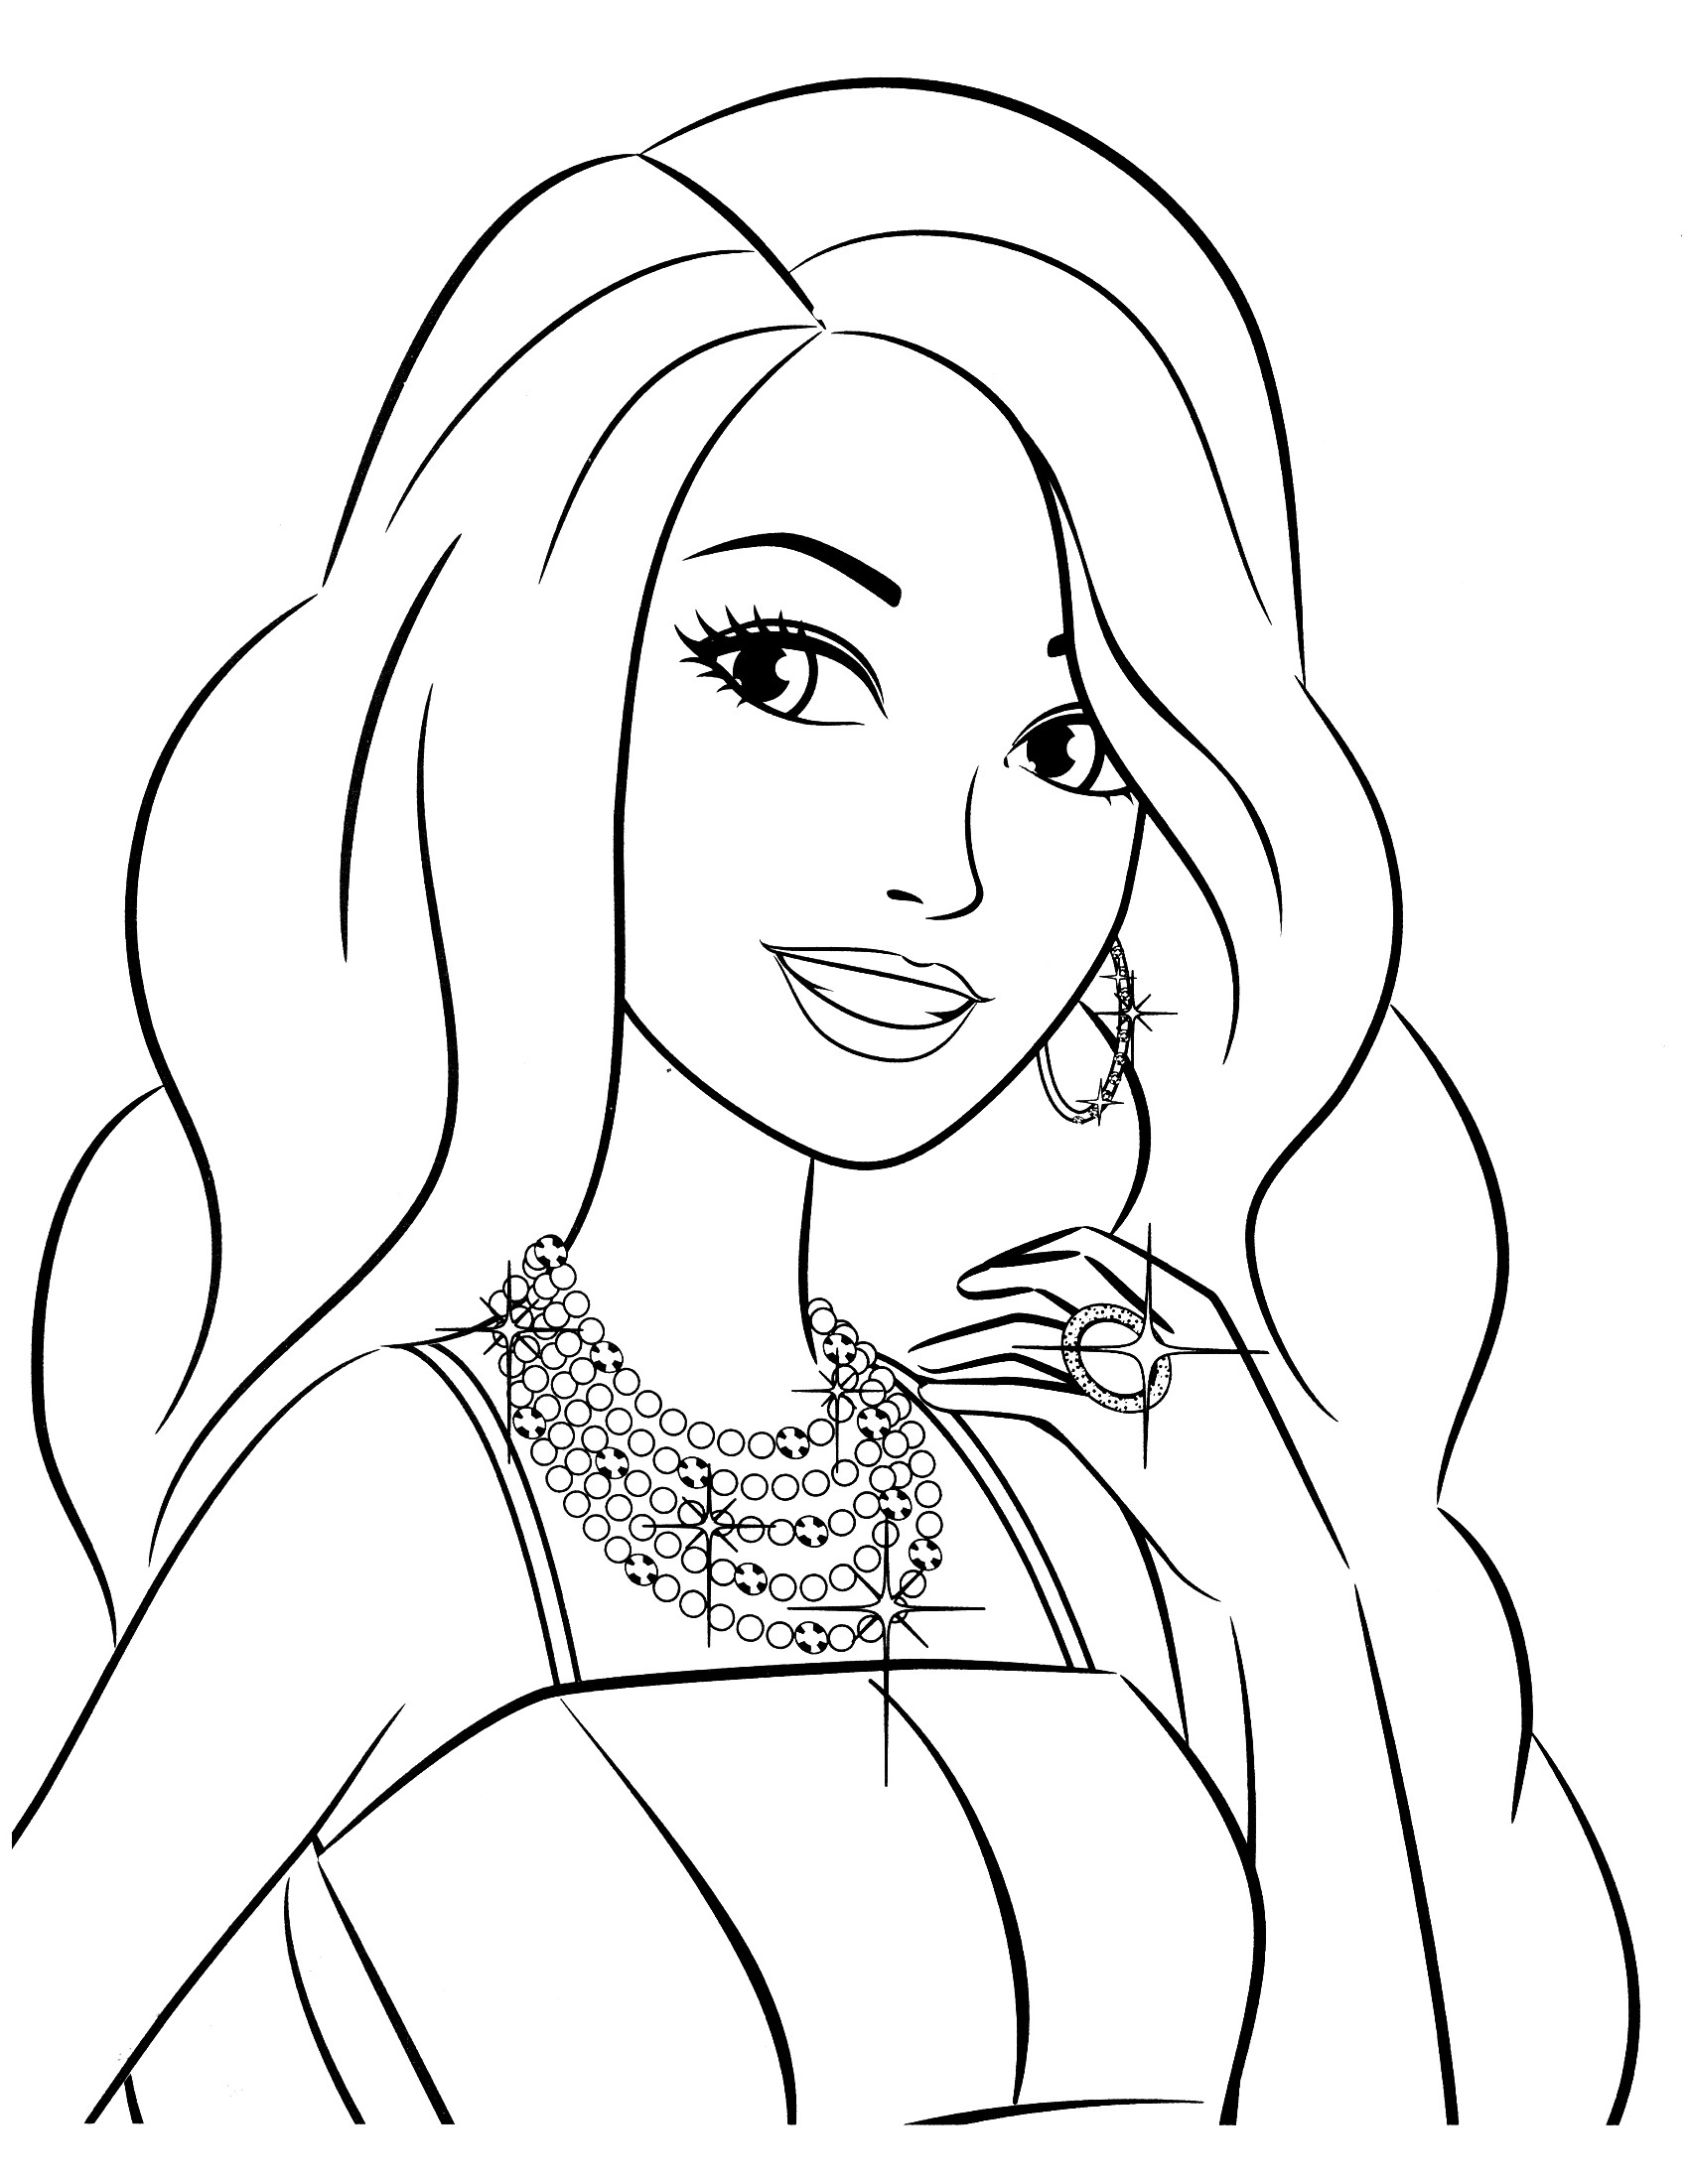 Barbie Coloring Pages To Print at GetDrawings Free download